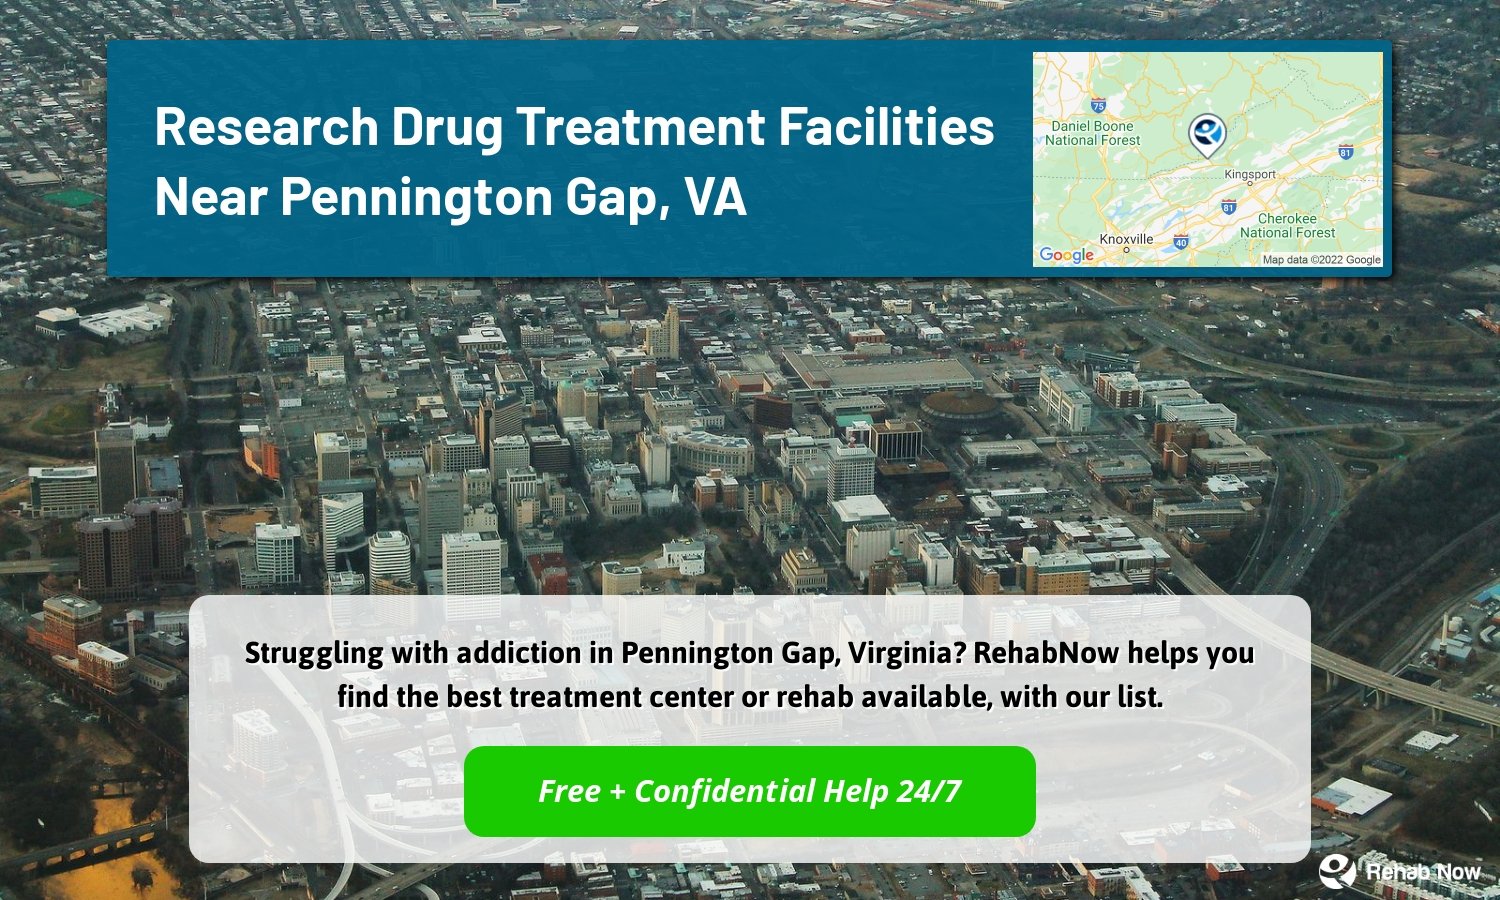 Struggling with addiction in Pennington Gap, Virginia? RehabNow helps you find the best treatment center or rehab available, with our list.